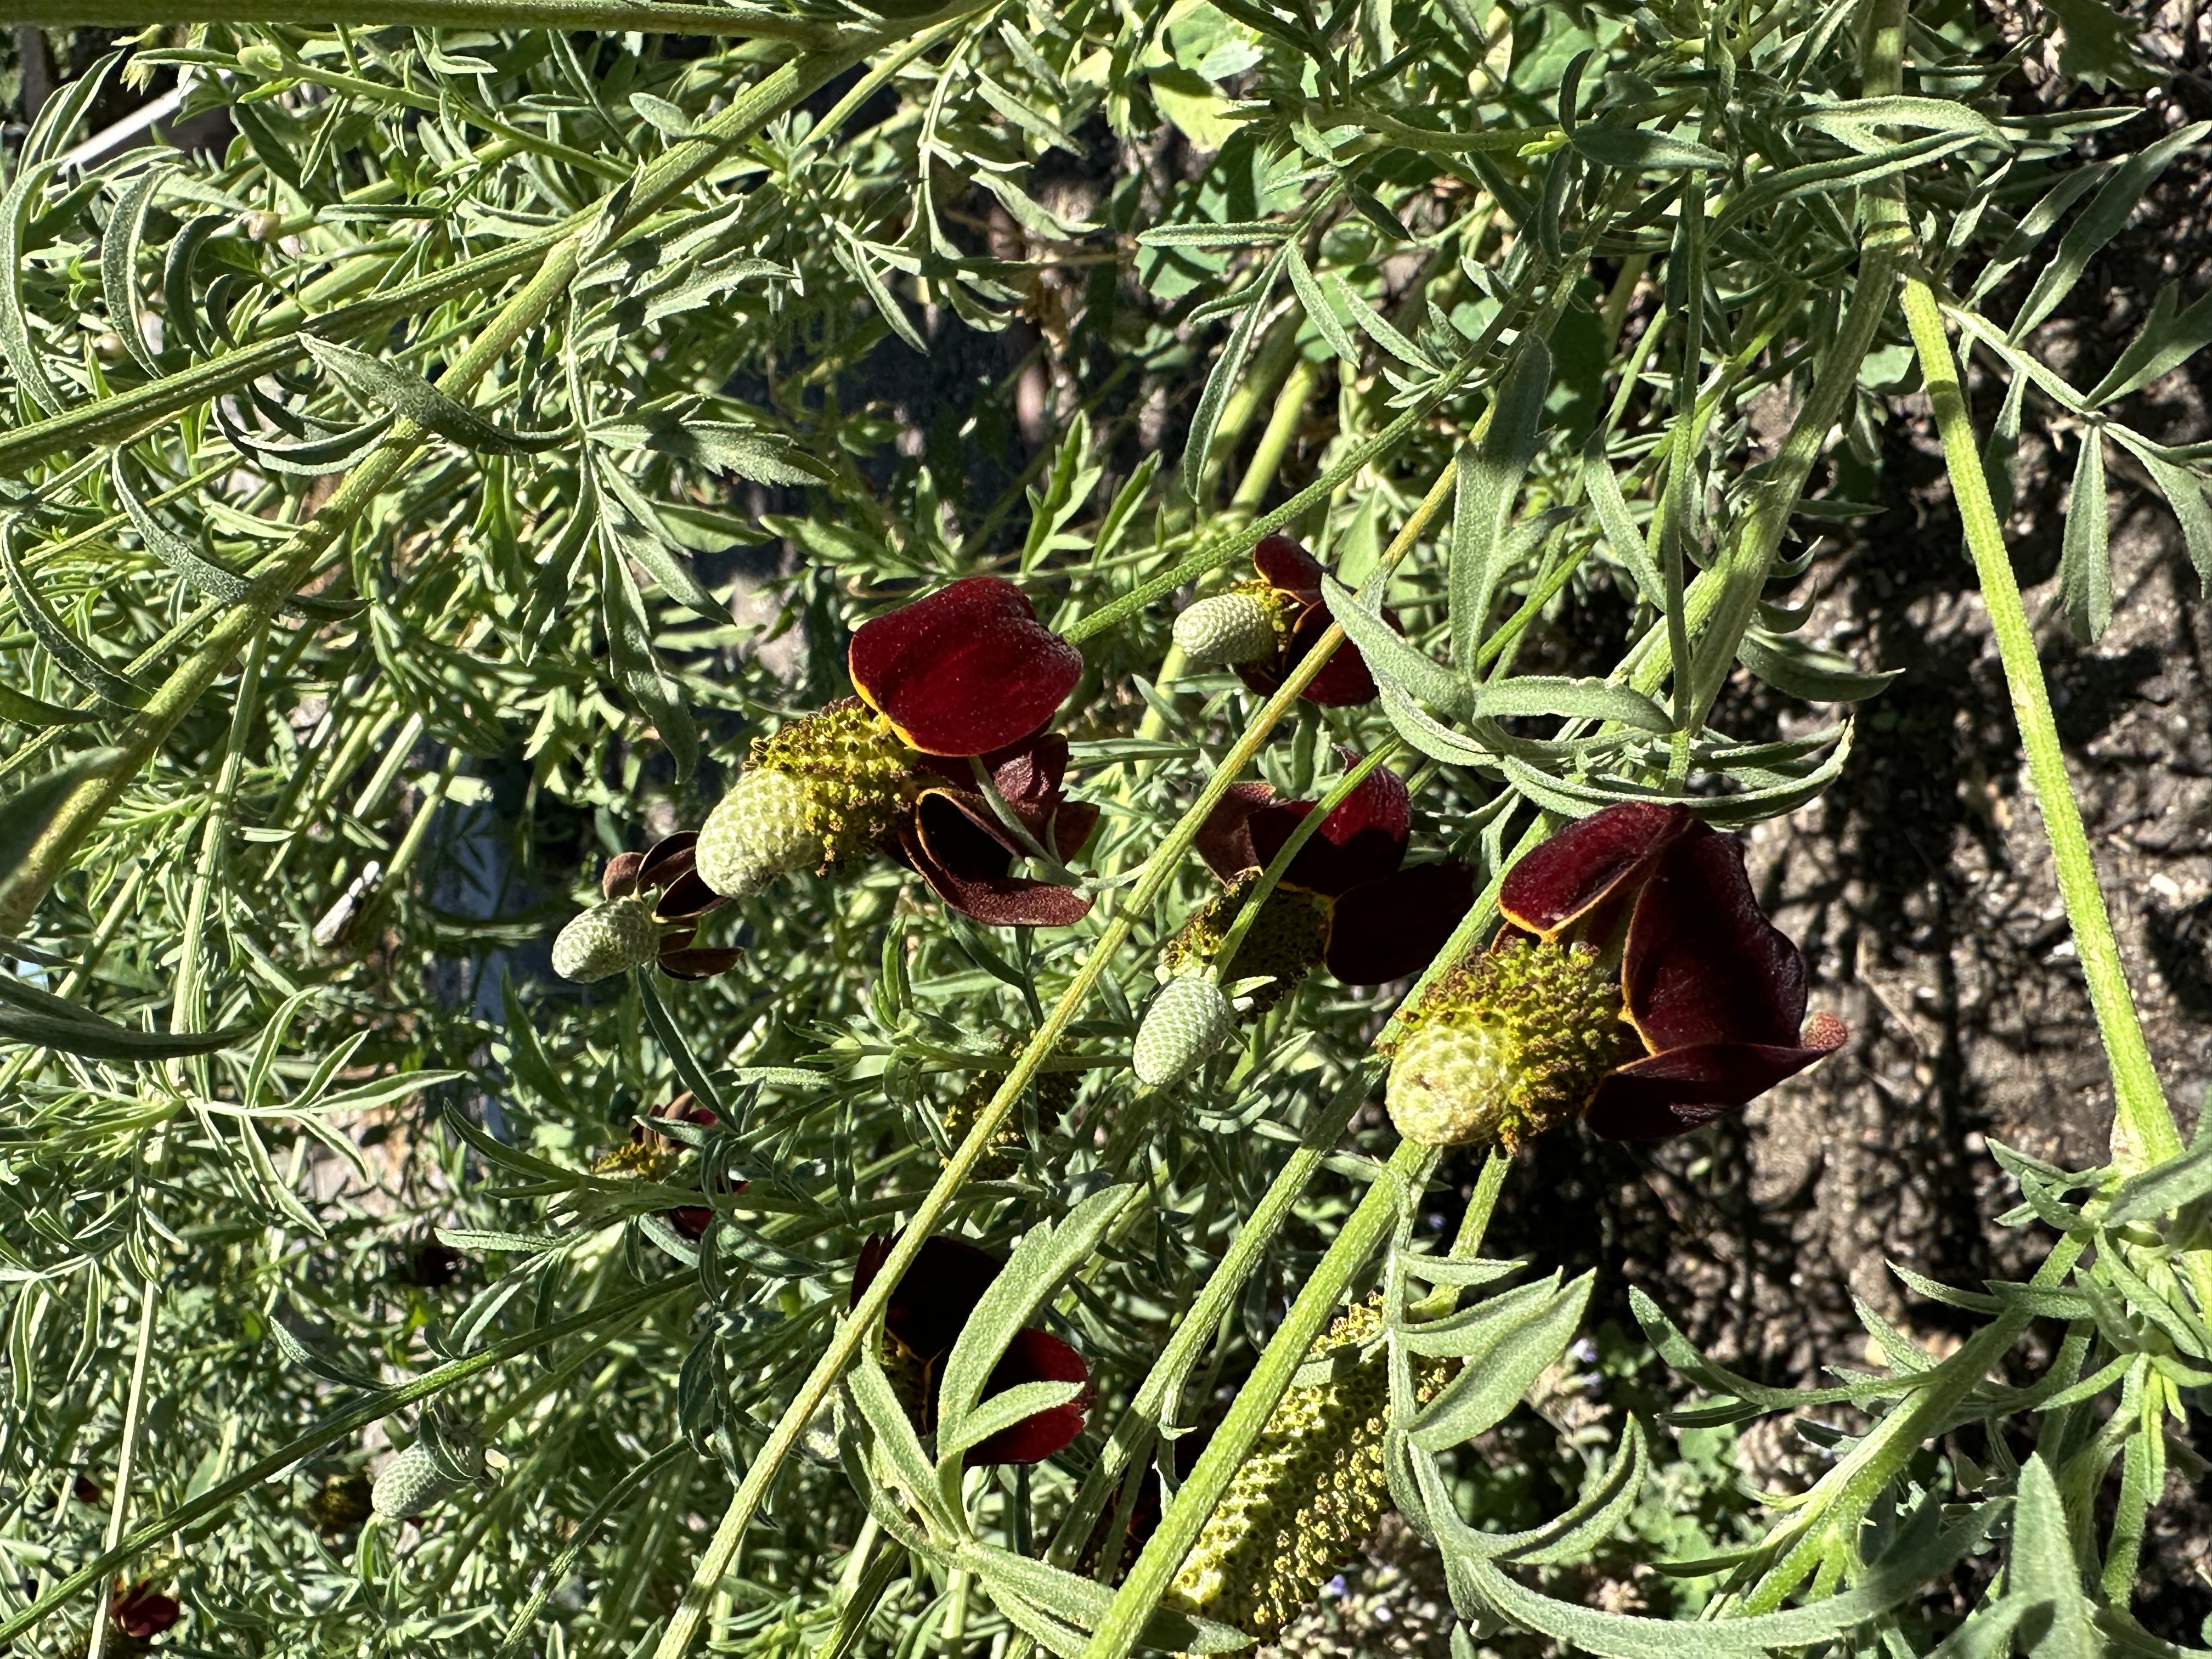 Red Mexican Hats have long stems with red petals surrounding a cone-shaped center